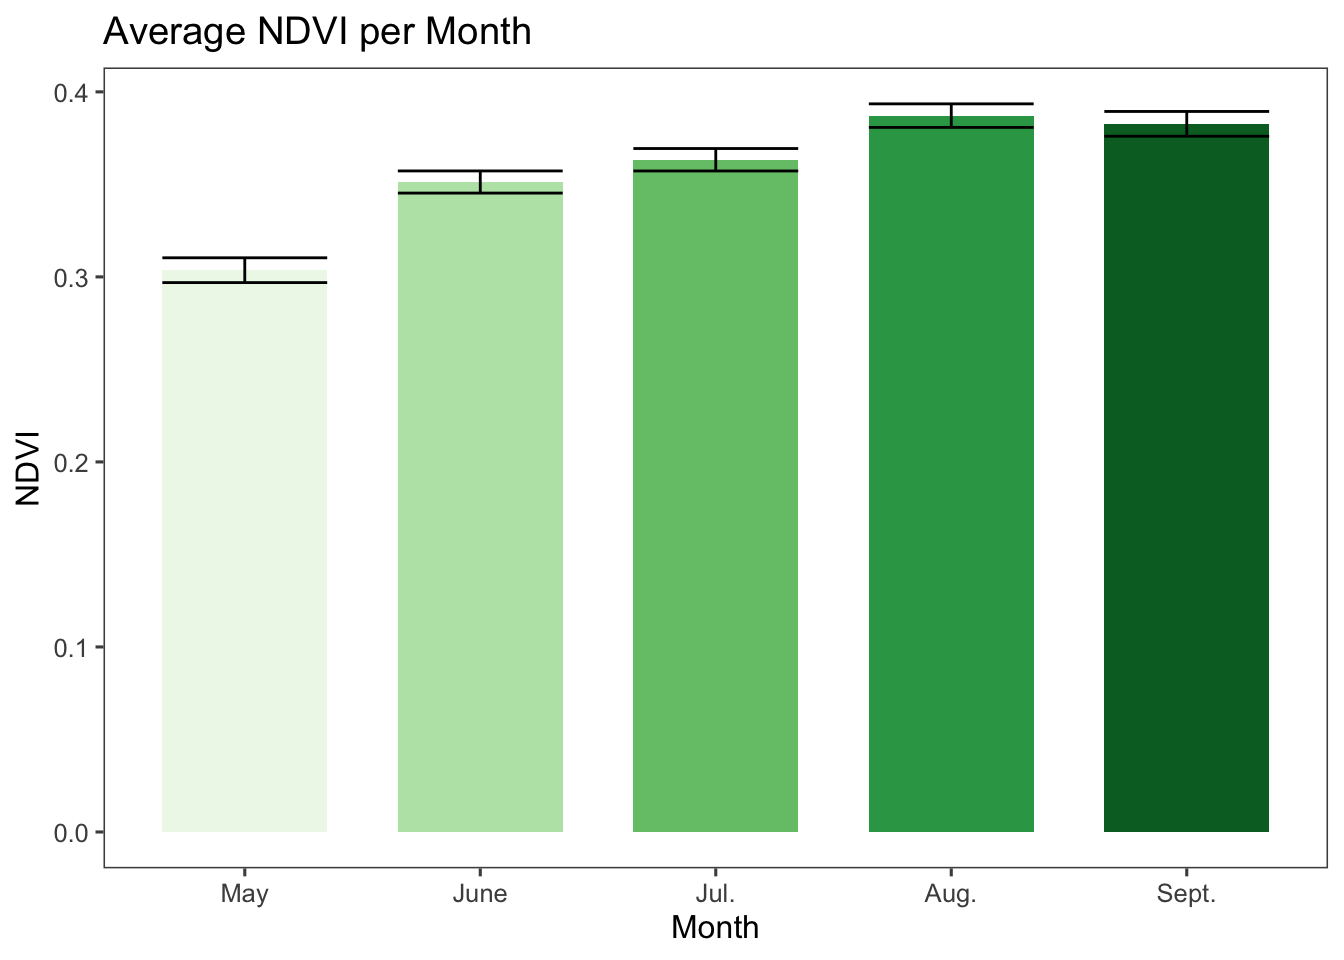 Mean NDVI and standard error per summer month across sites from 1984 to 2019.